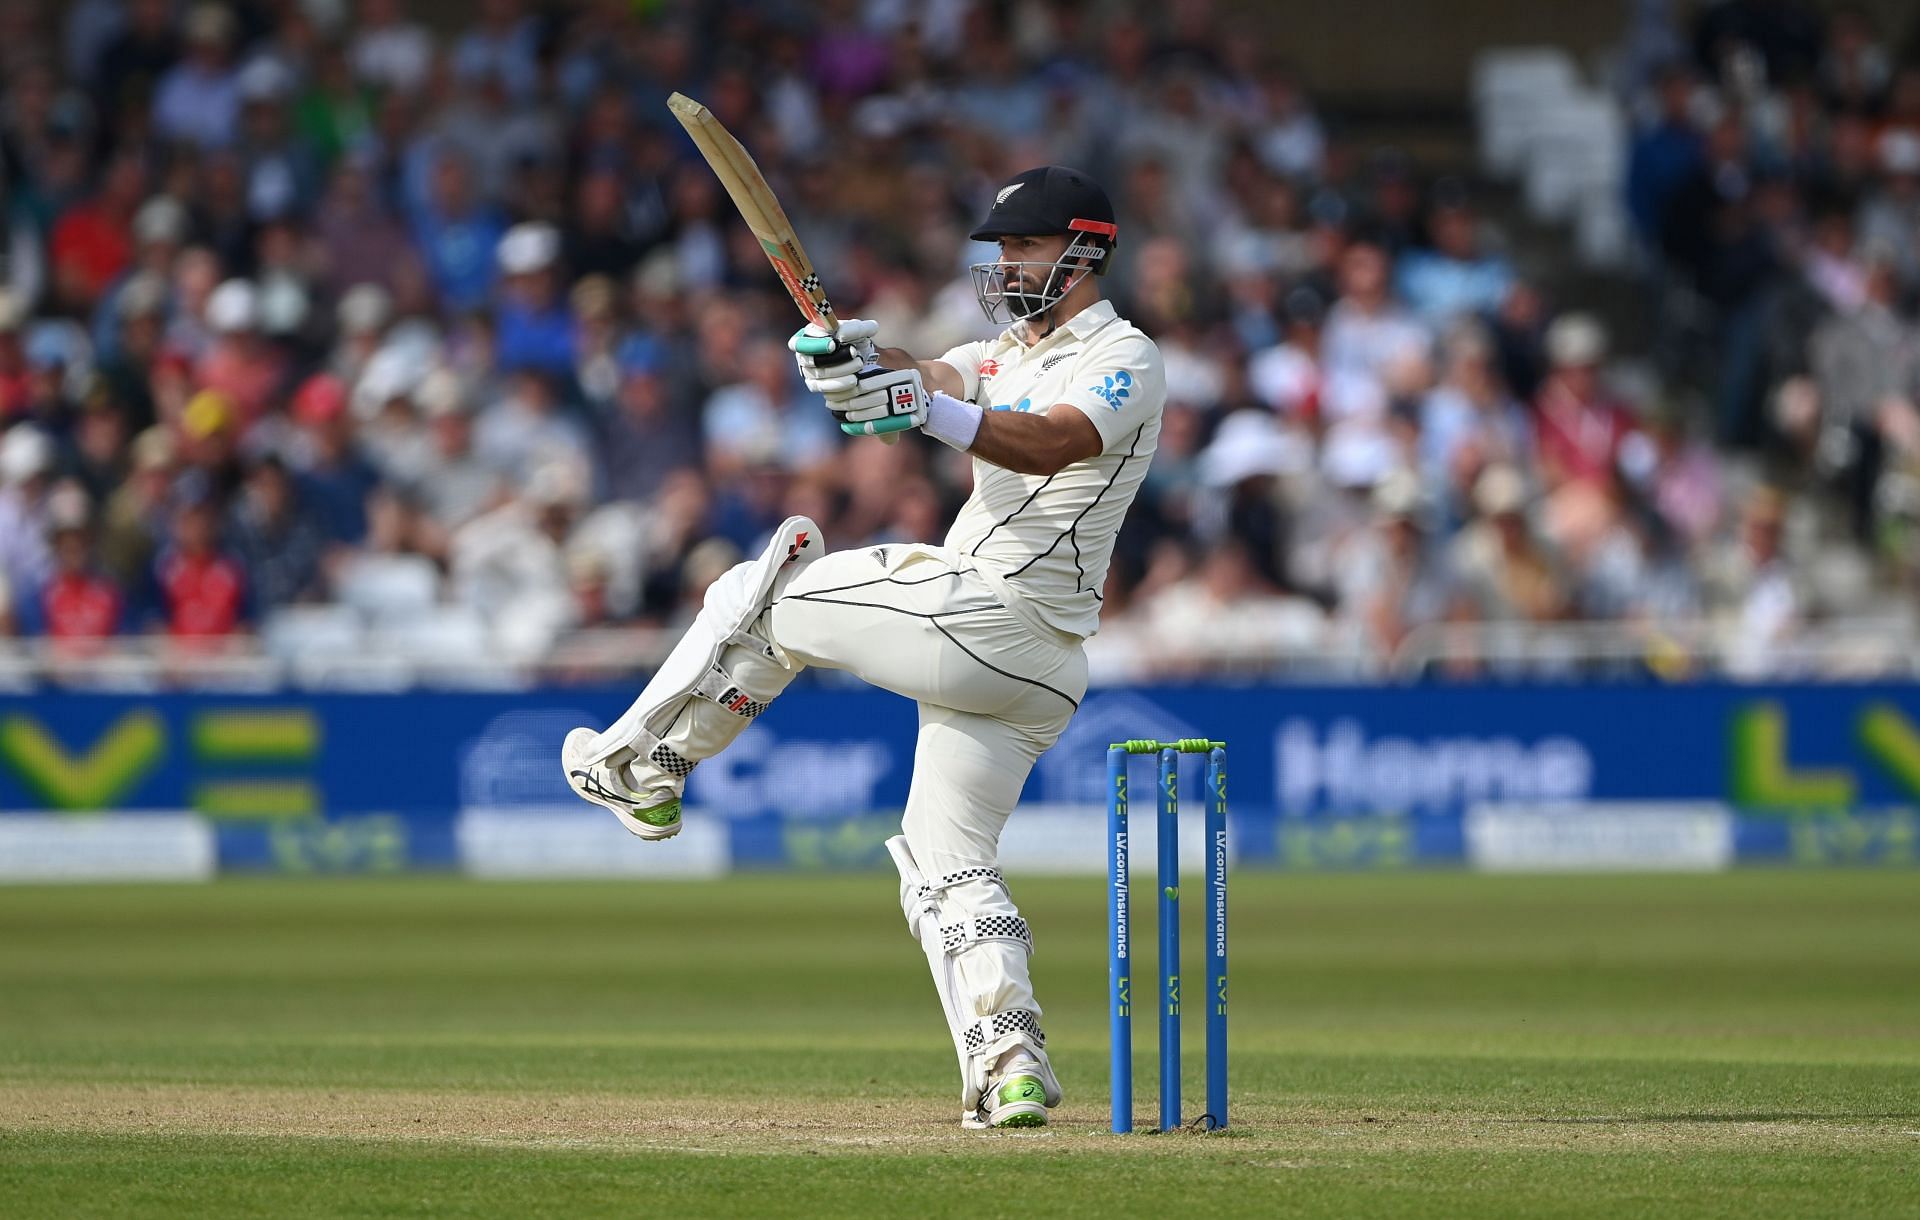 England v New Zealand - Second LV= Insurance Test Match: Day Two (Image courtesy: Getty Images)